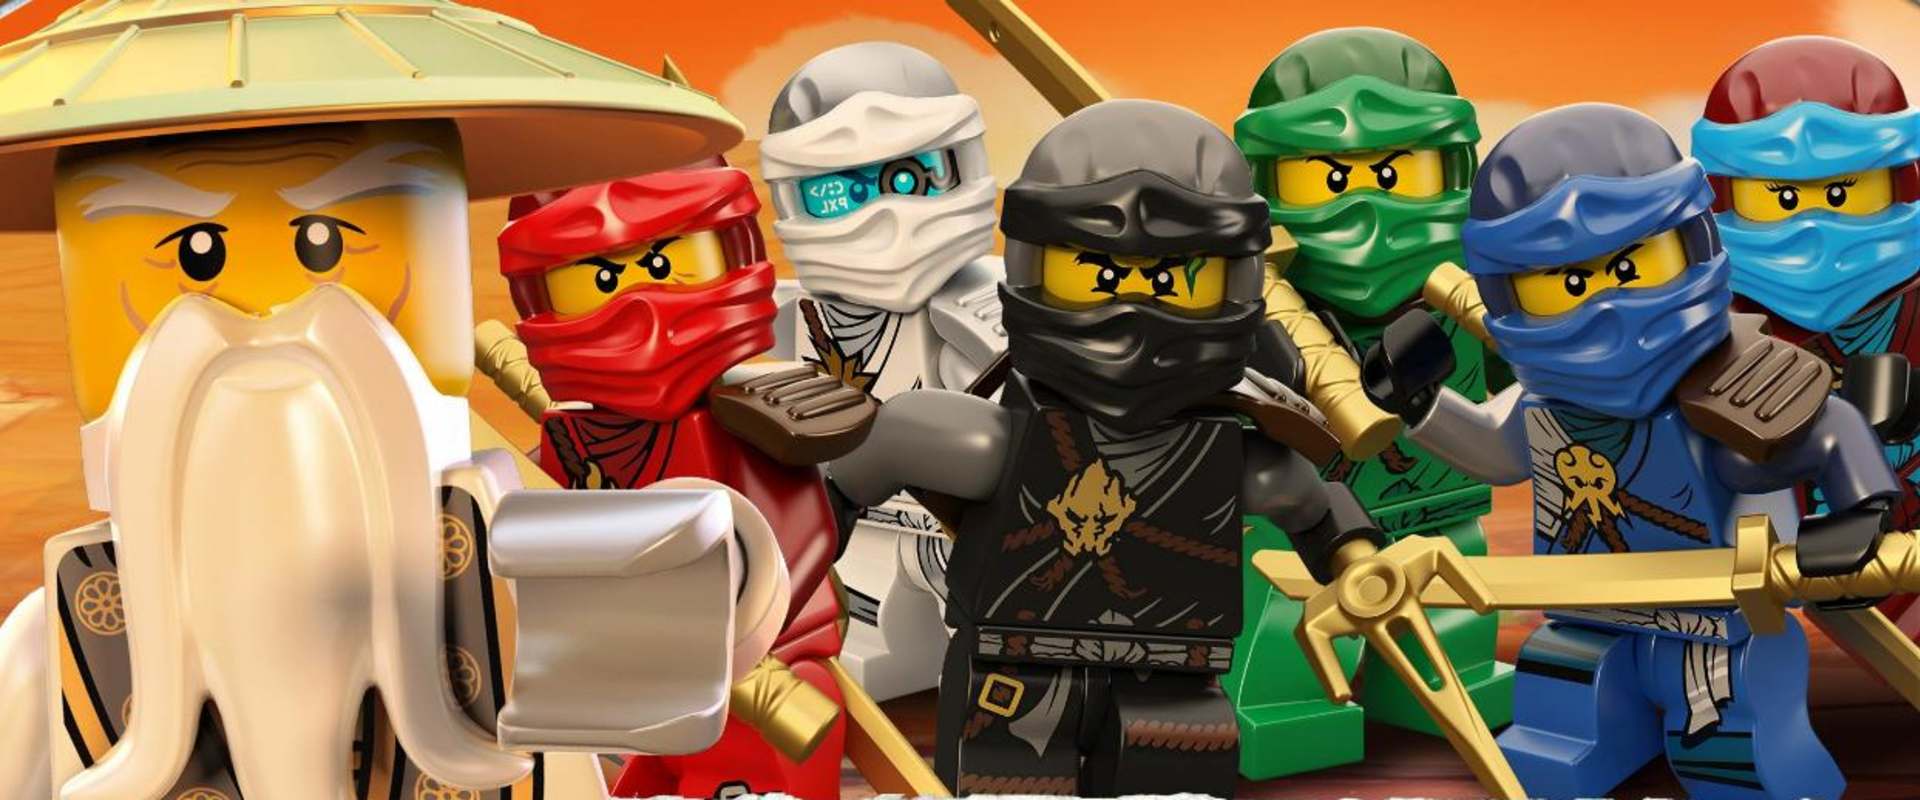 Ninjago: Masters of Spinjitzu - Day of the Departed background 1